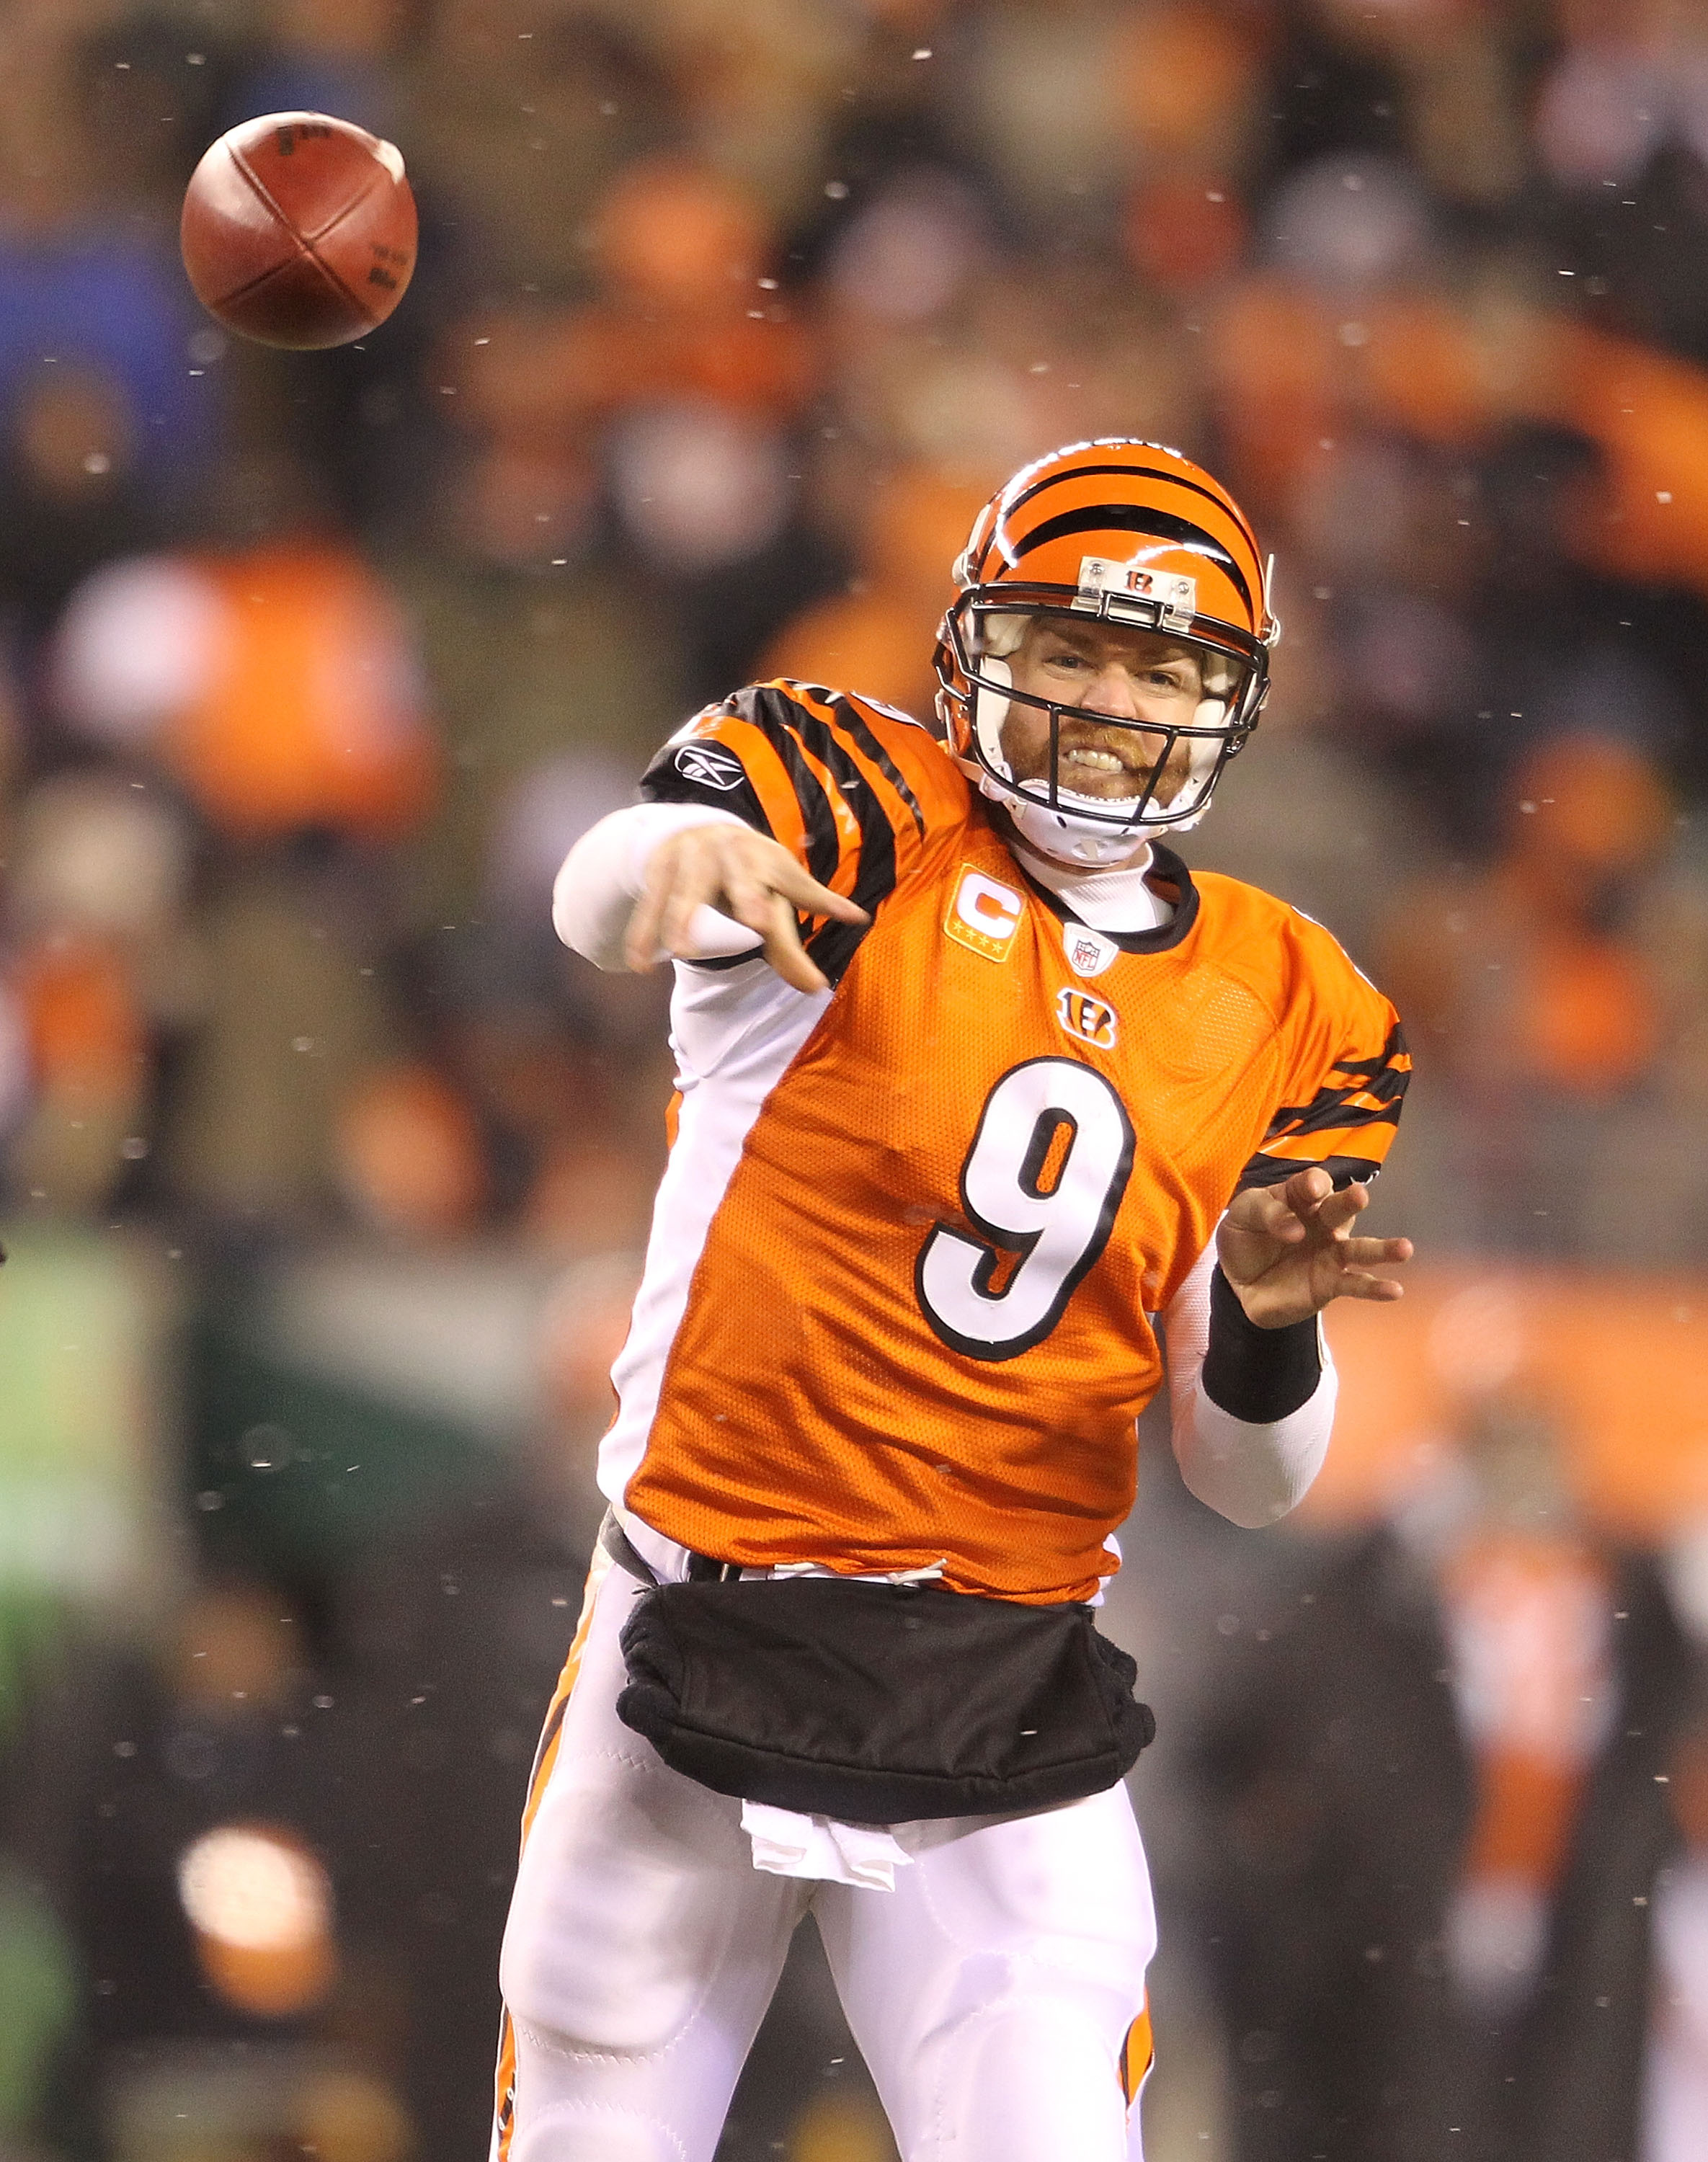 CINCINNATI - DECEMBER 26:  Carson Palmer #9 of the Cincinnati Bengals throws a pass during the NFL game against the San Diego Chargers at Paul Brown Stadium on December 26, 2010 in Cincinnati, Ohio. The Bengals 34-20.  (Photo by Andy Lyons/Getty Images)